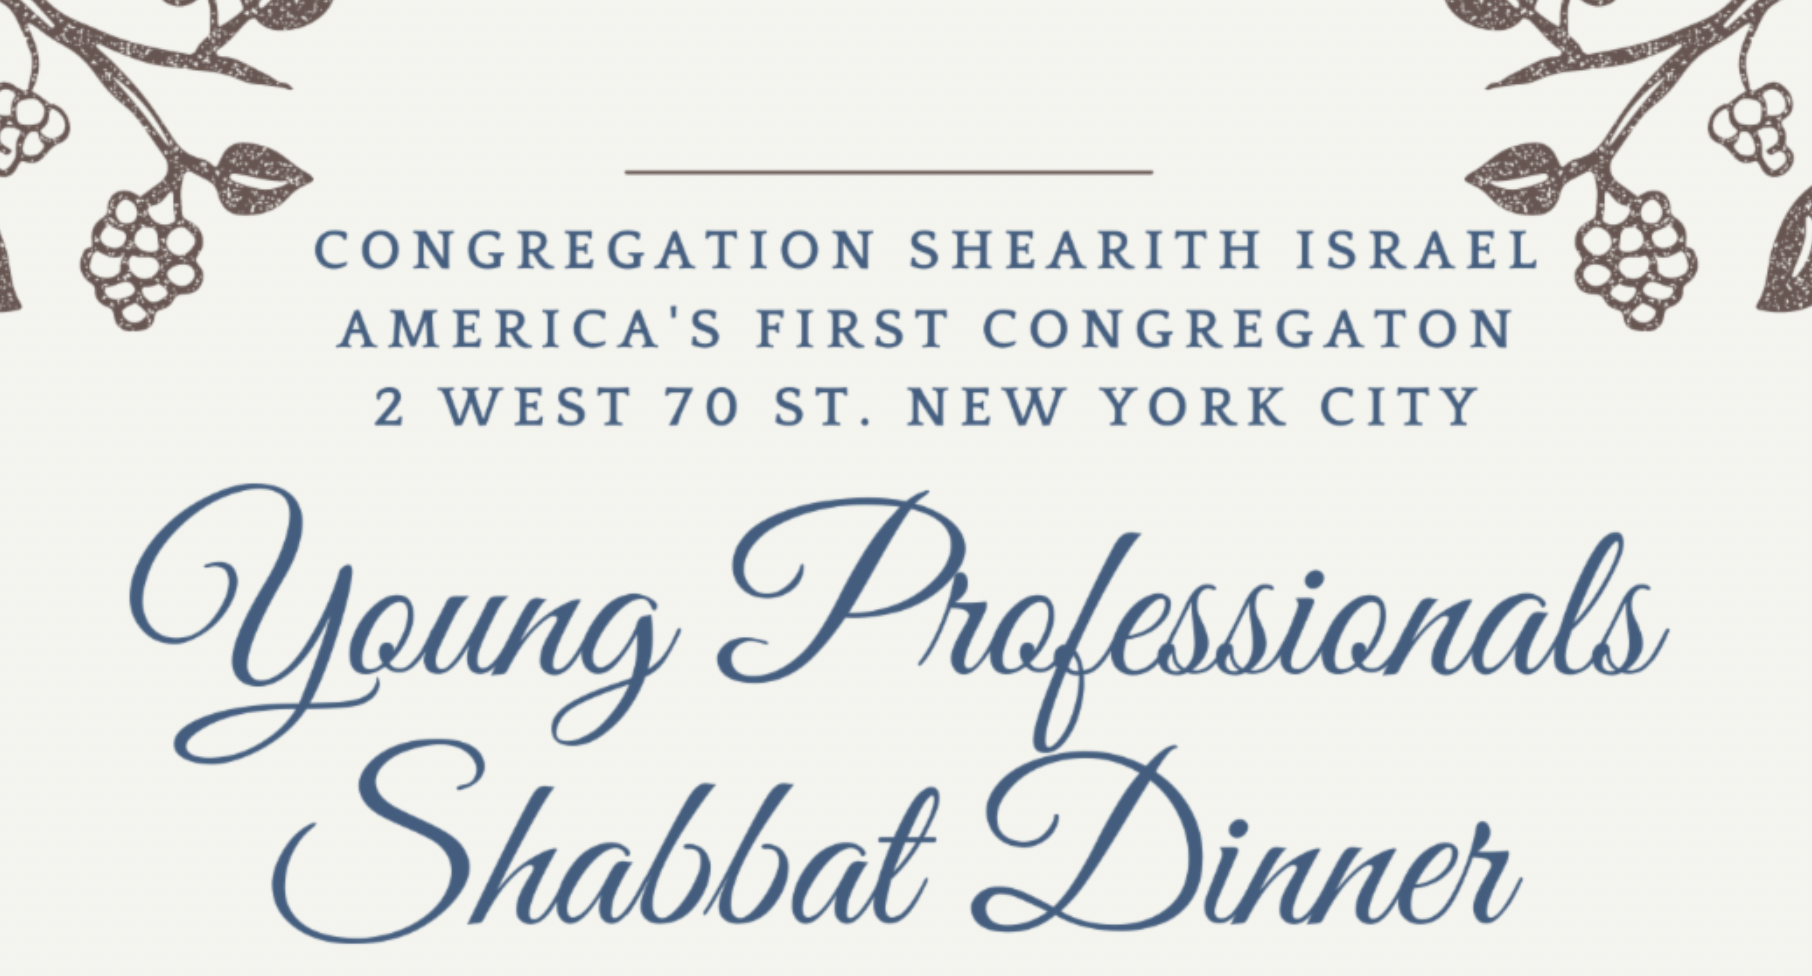 Young Professionals Shabbat Dinner with Rabbi Soloveichik